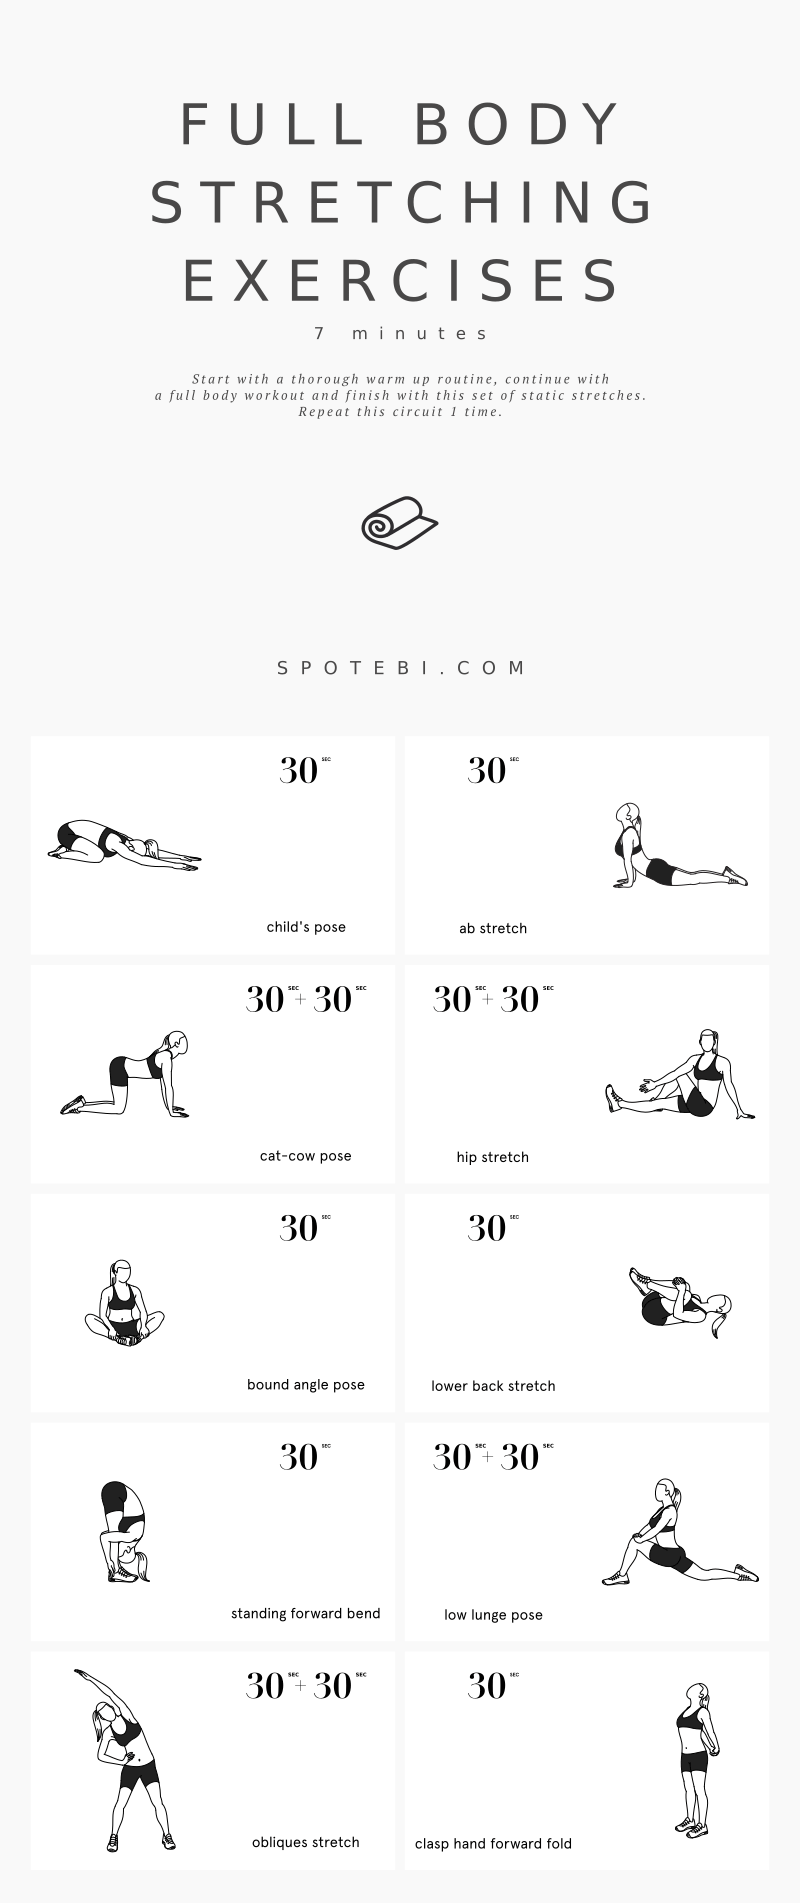 Relax the mind, boost your flexibility and improve joint range of motion with this set of full body stretching exercises. A 7-minute cool down routine to prevent muscle soreness and stretch your whole body! https://www.spotebi.com/workout-routines/full-body-stretching-exercises/